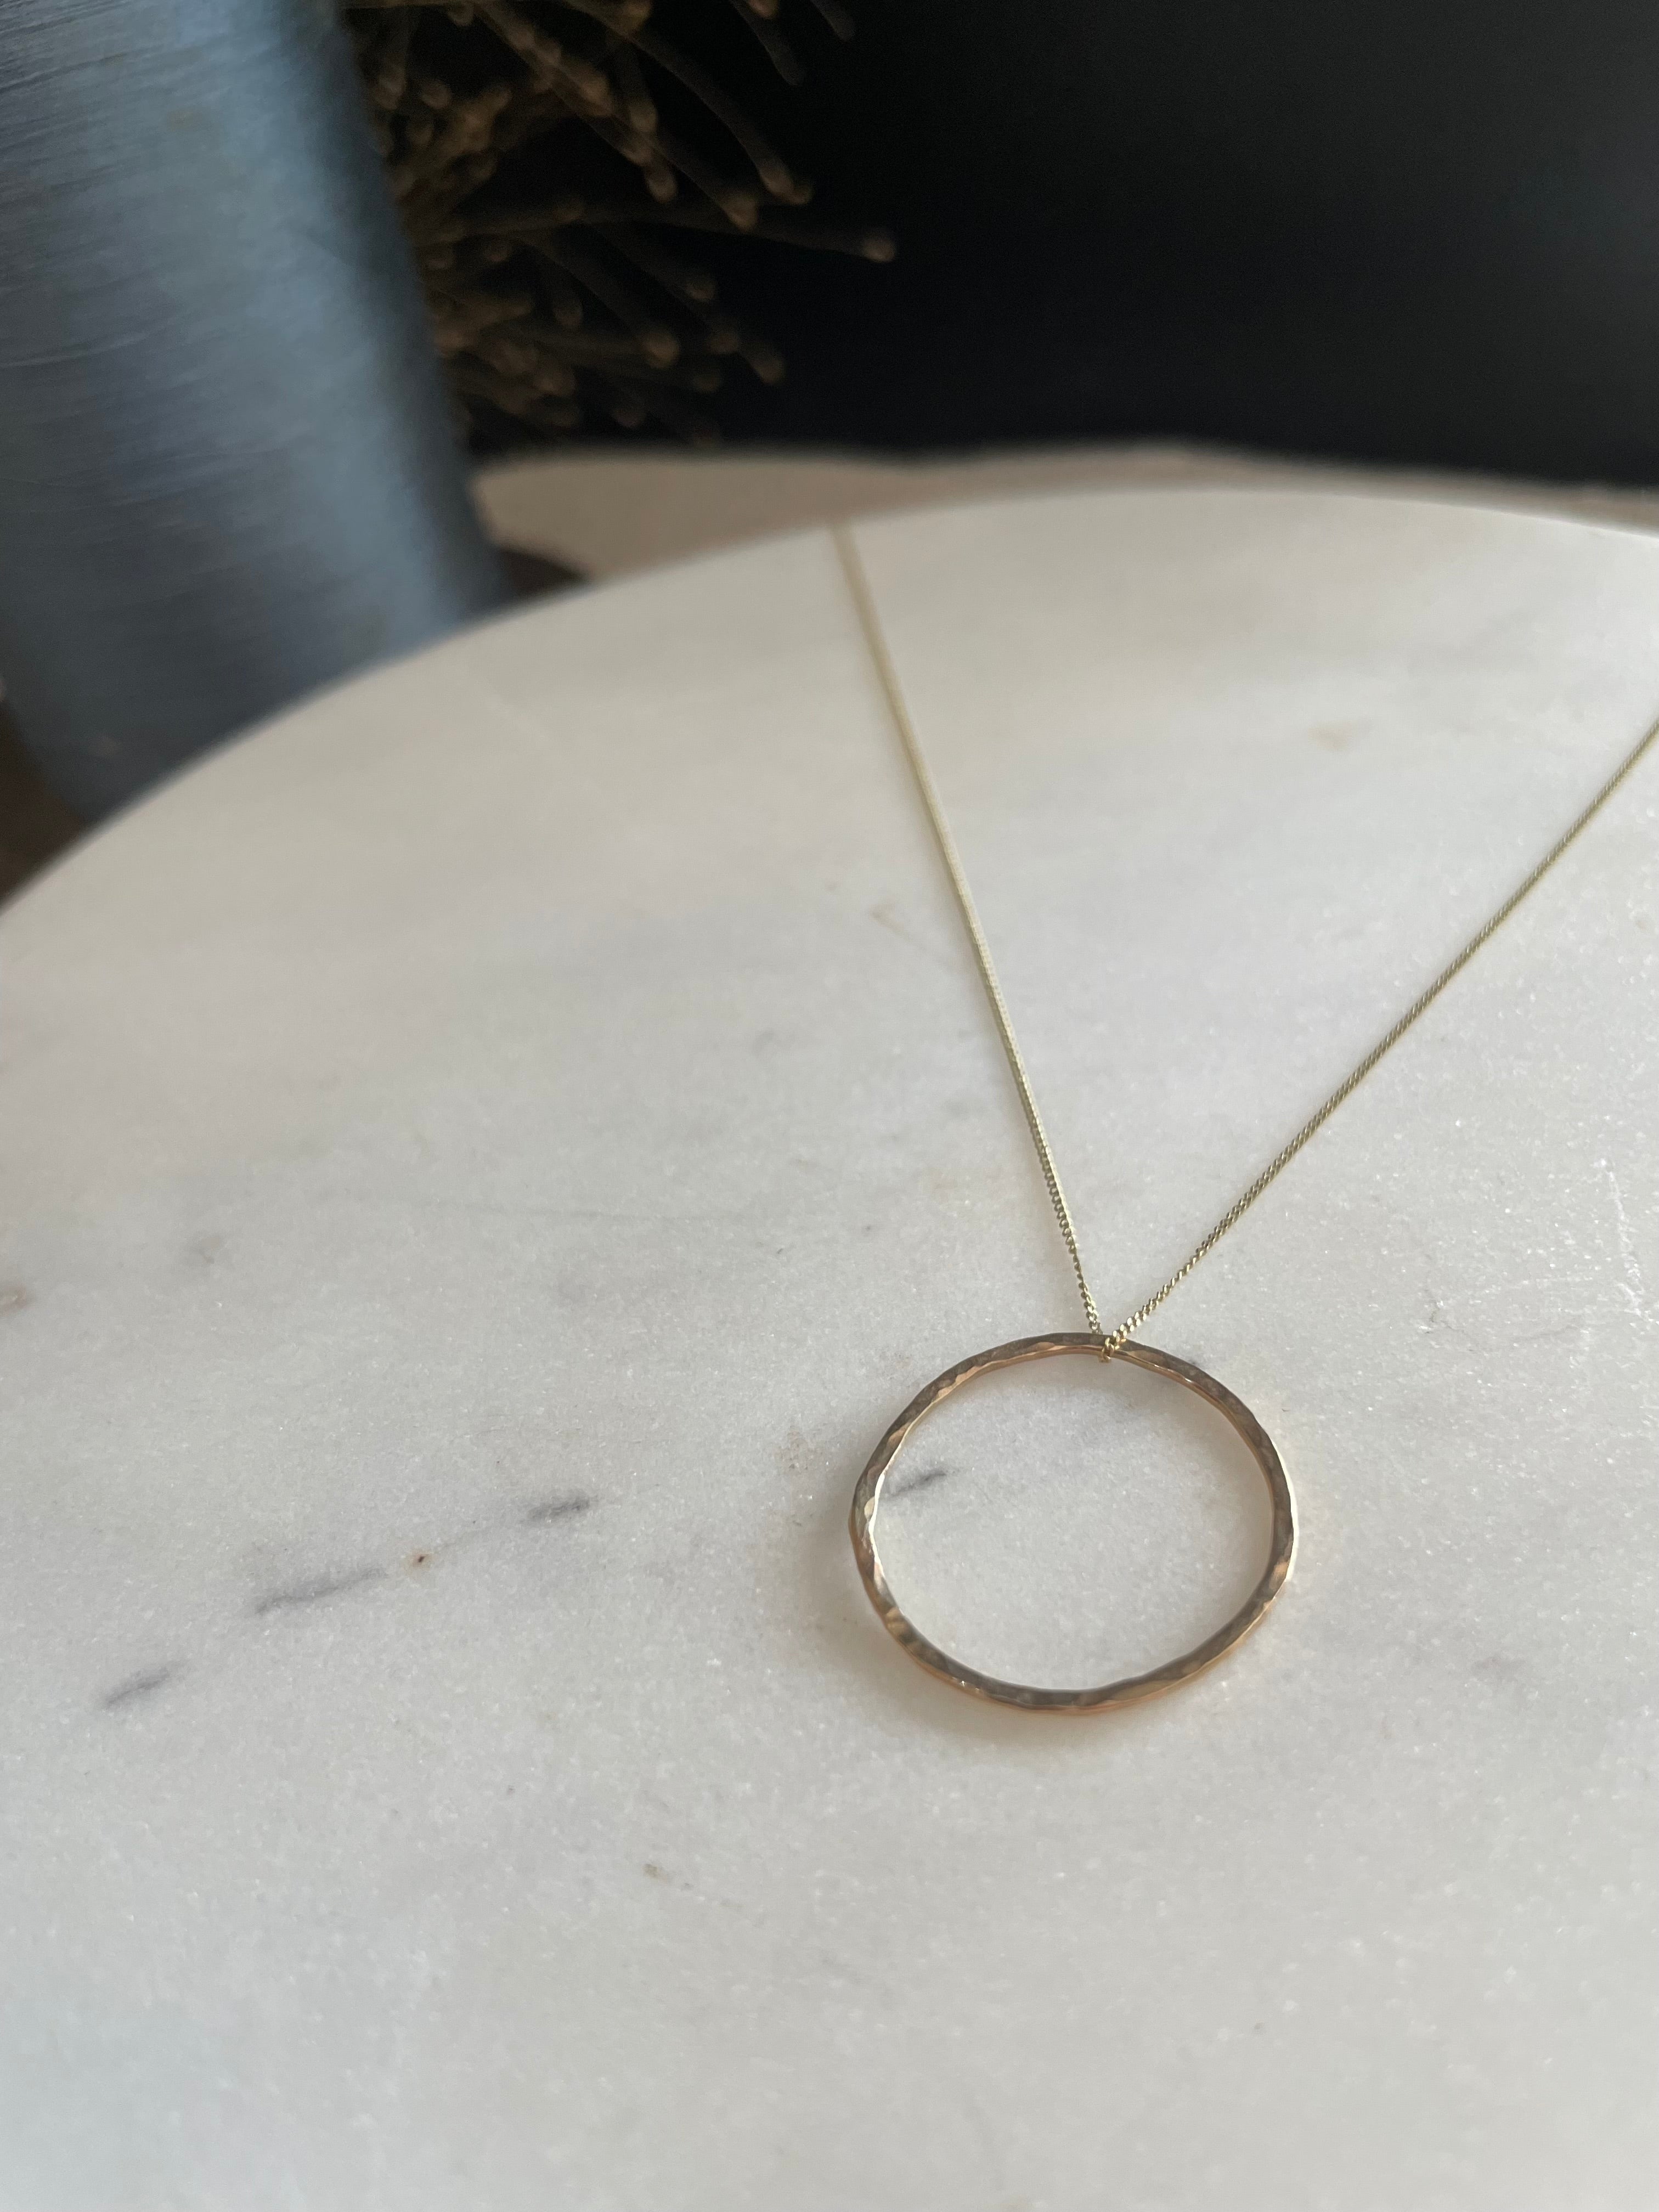 Gold eternity circle - 9 ct hammered on 45cm gold chain